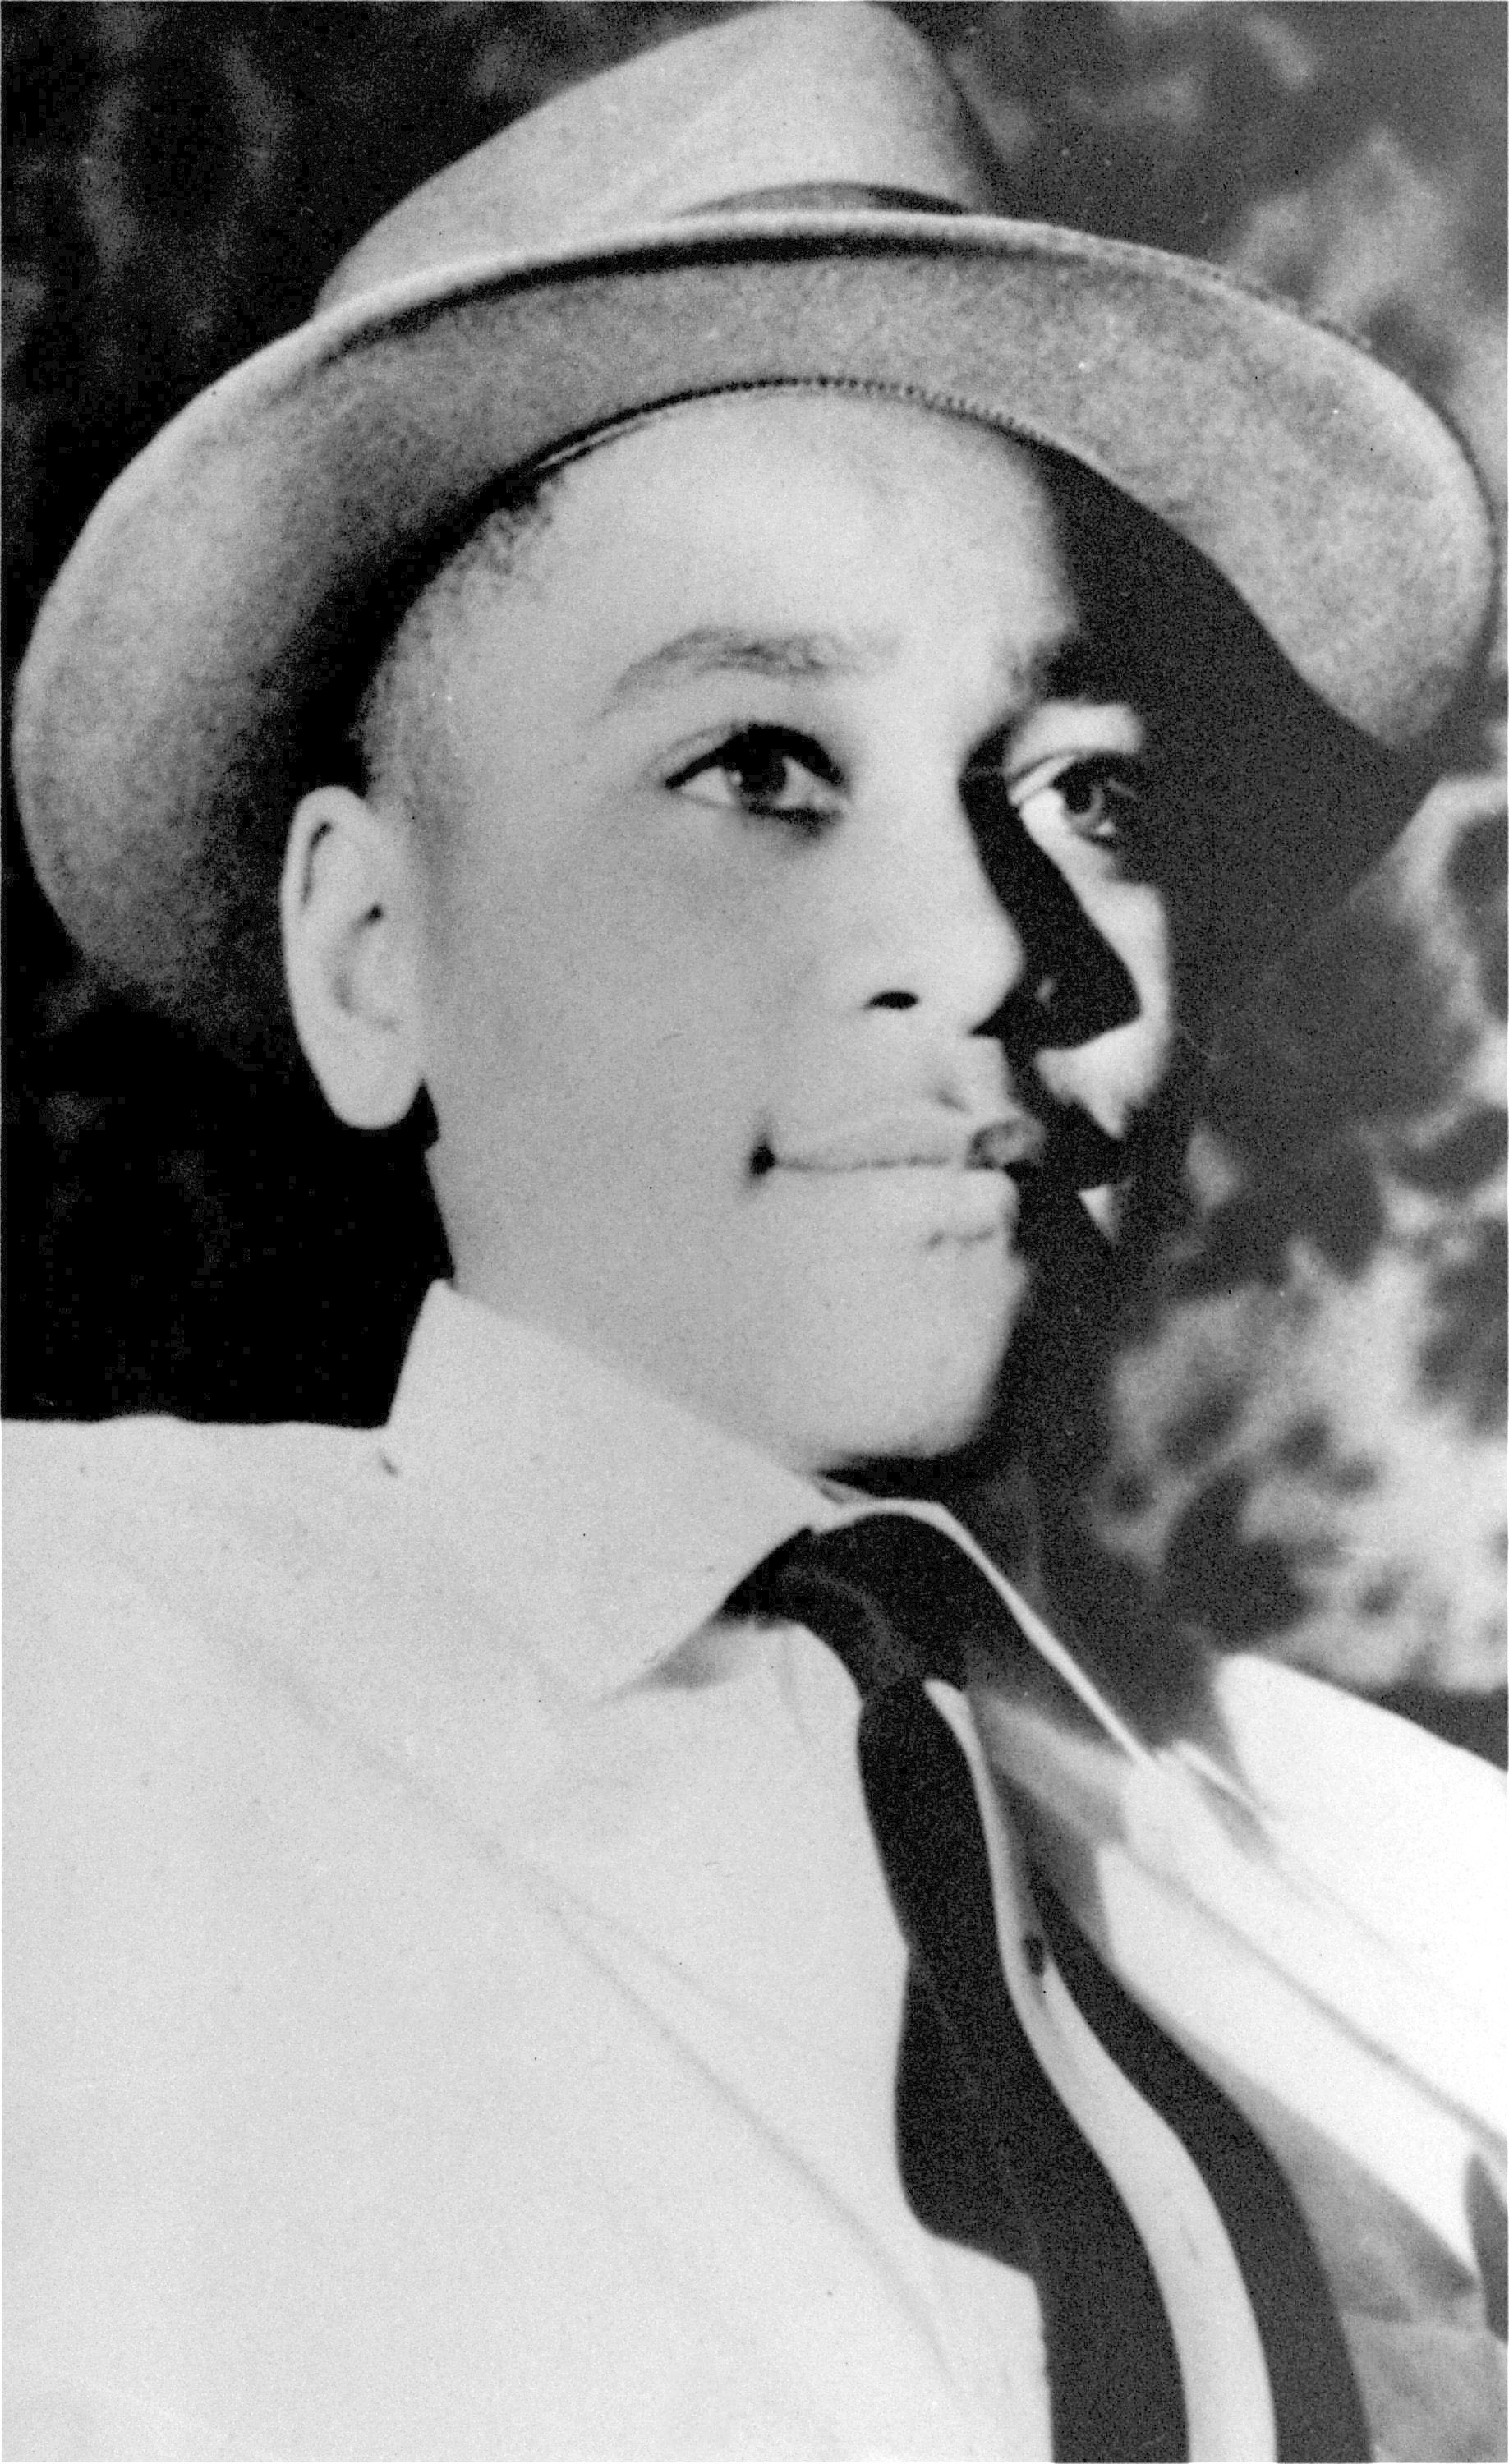 This undated file photo shows Emmett Till, a 14-year-old black Chicago boy, whose body was found in the Tallahatchie River near the Delta community of Money, Miss., Aug. 31, 1955. (AP)